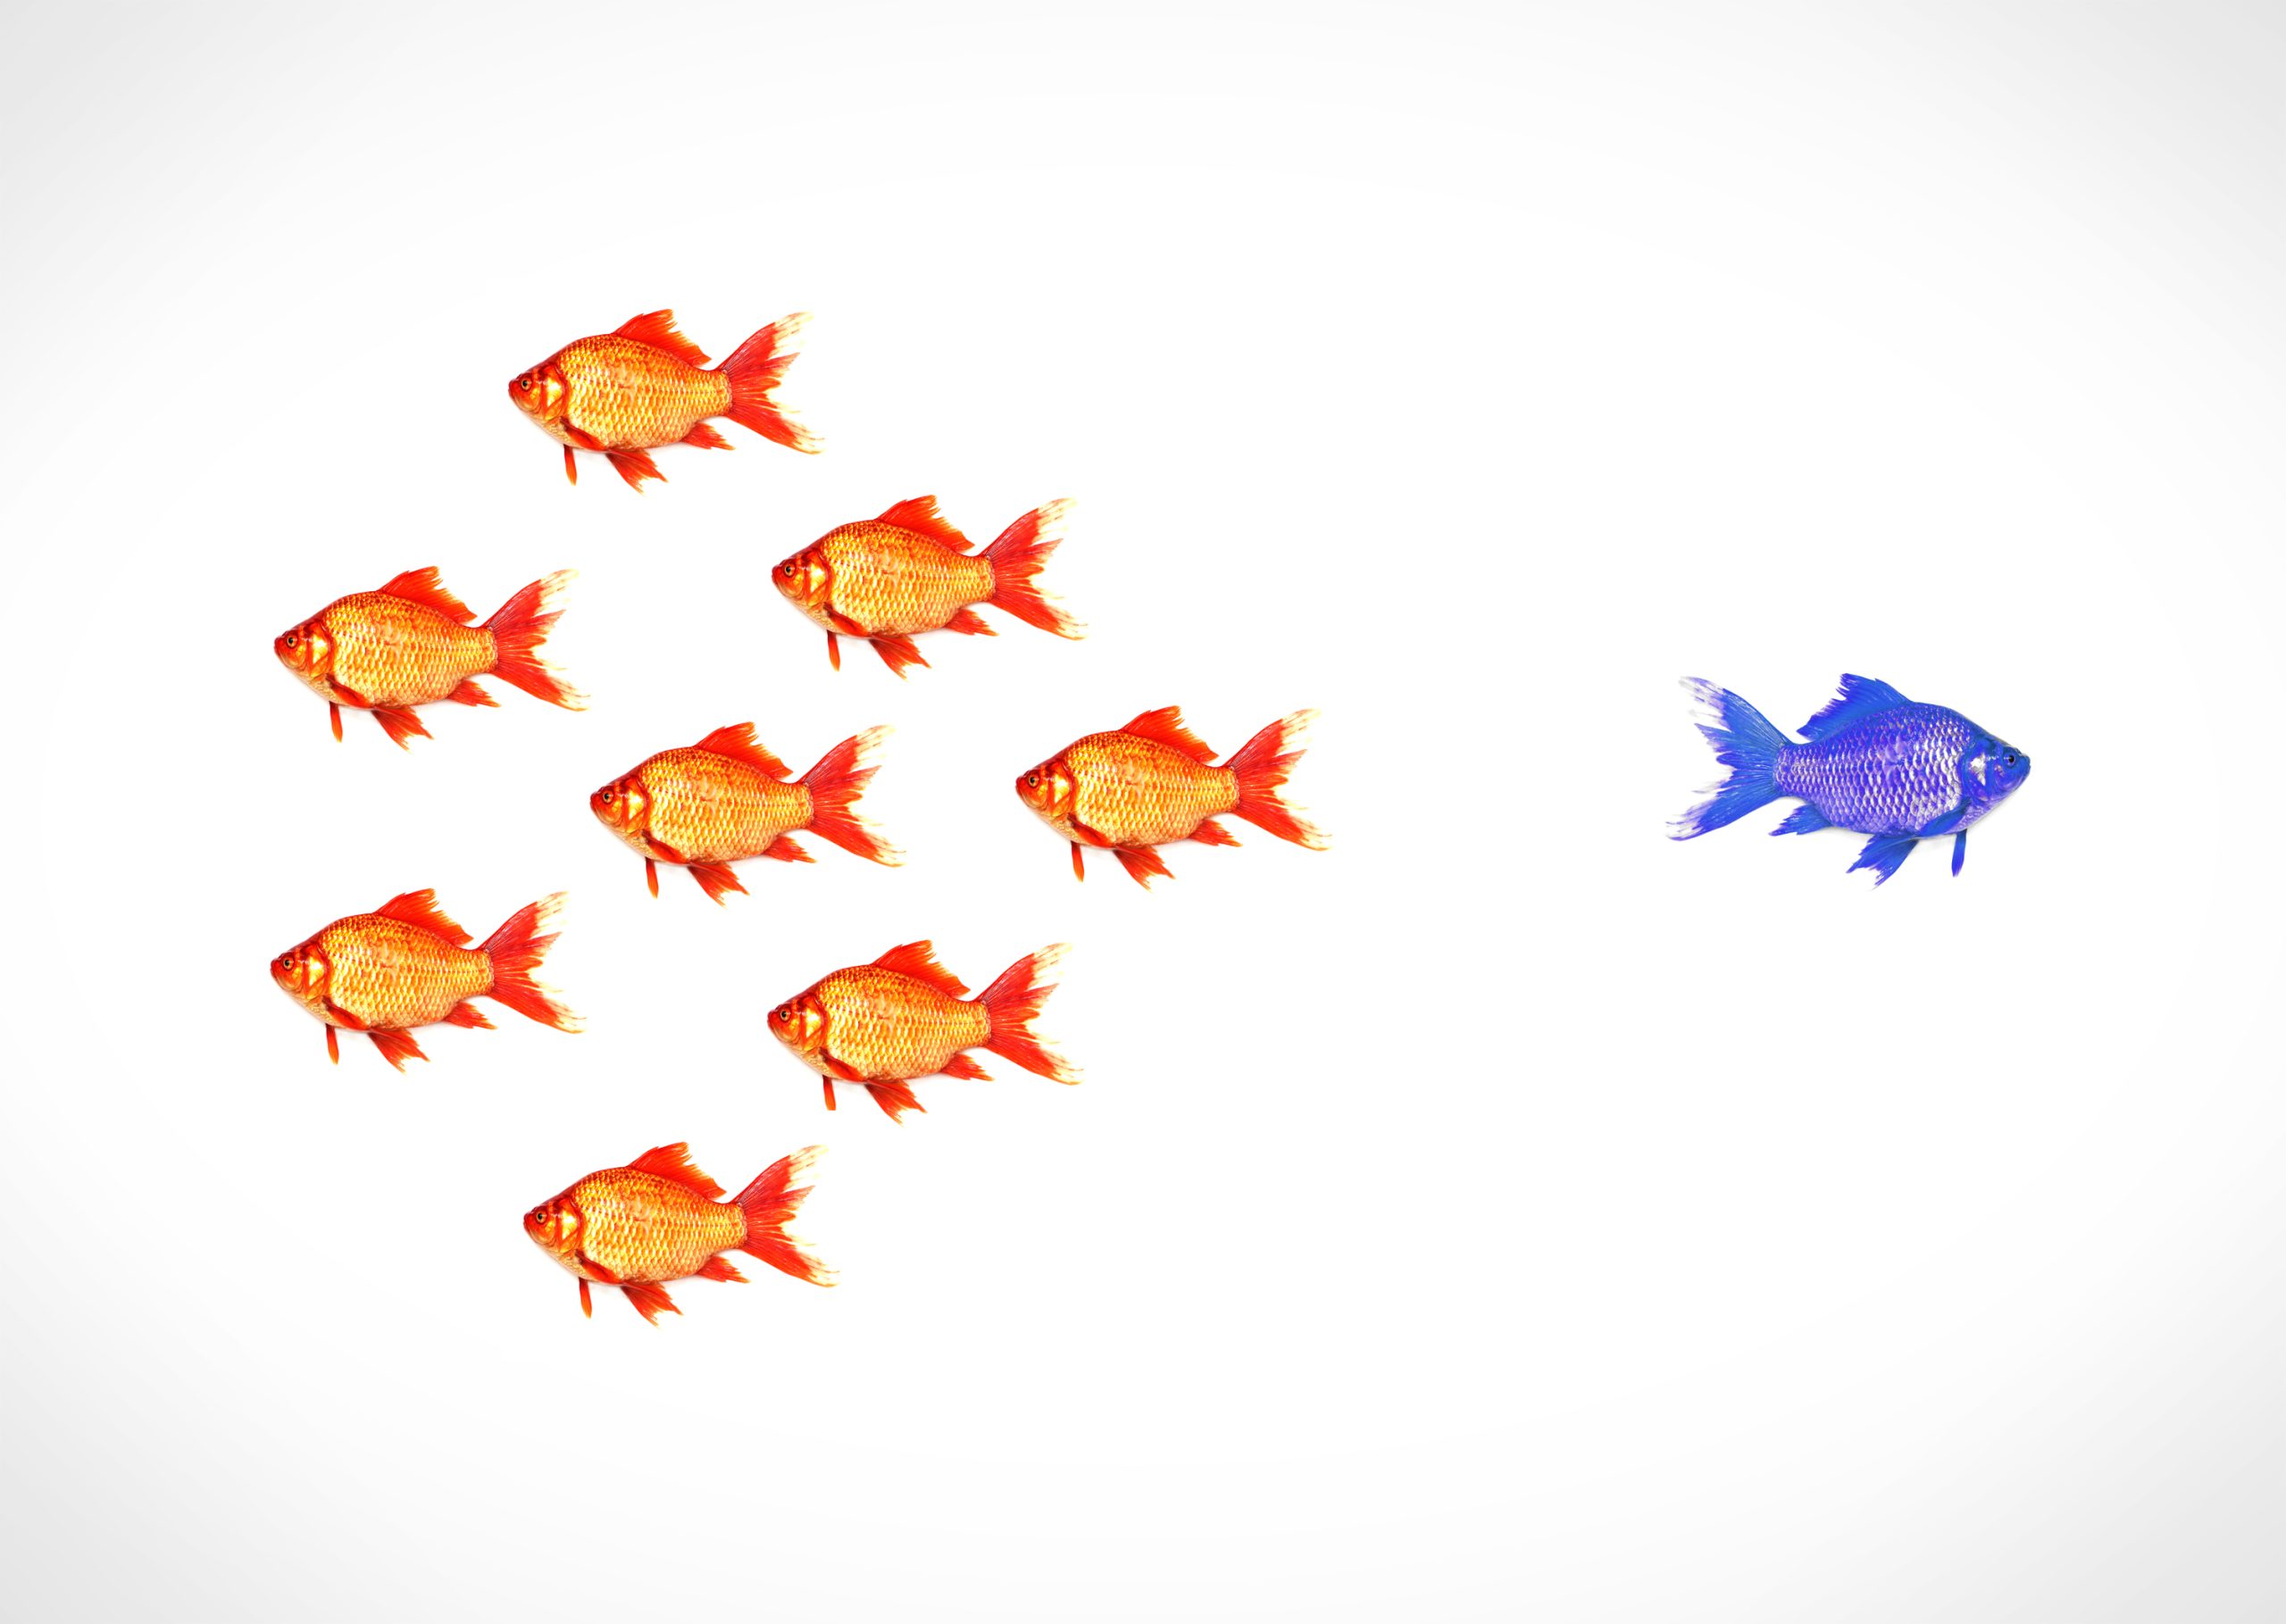 Standing out from the crowd – A blue goldfish escapes from the s